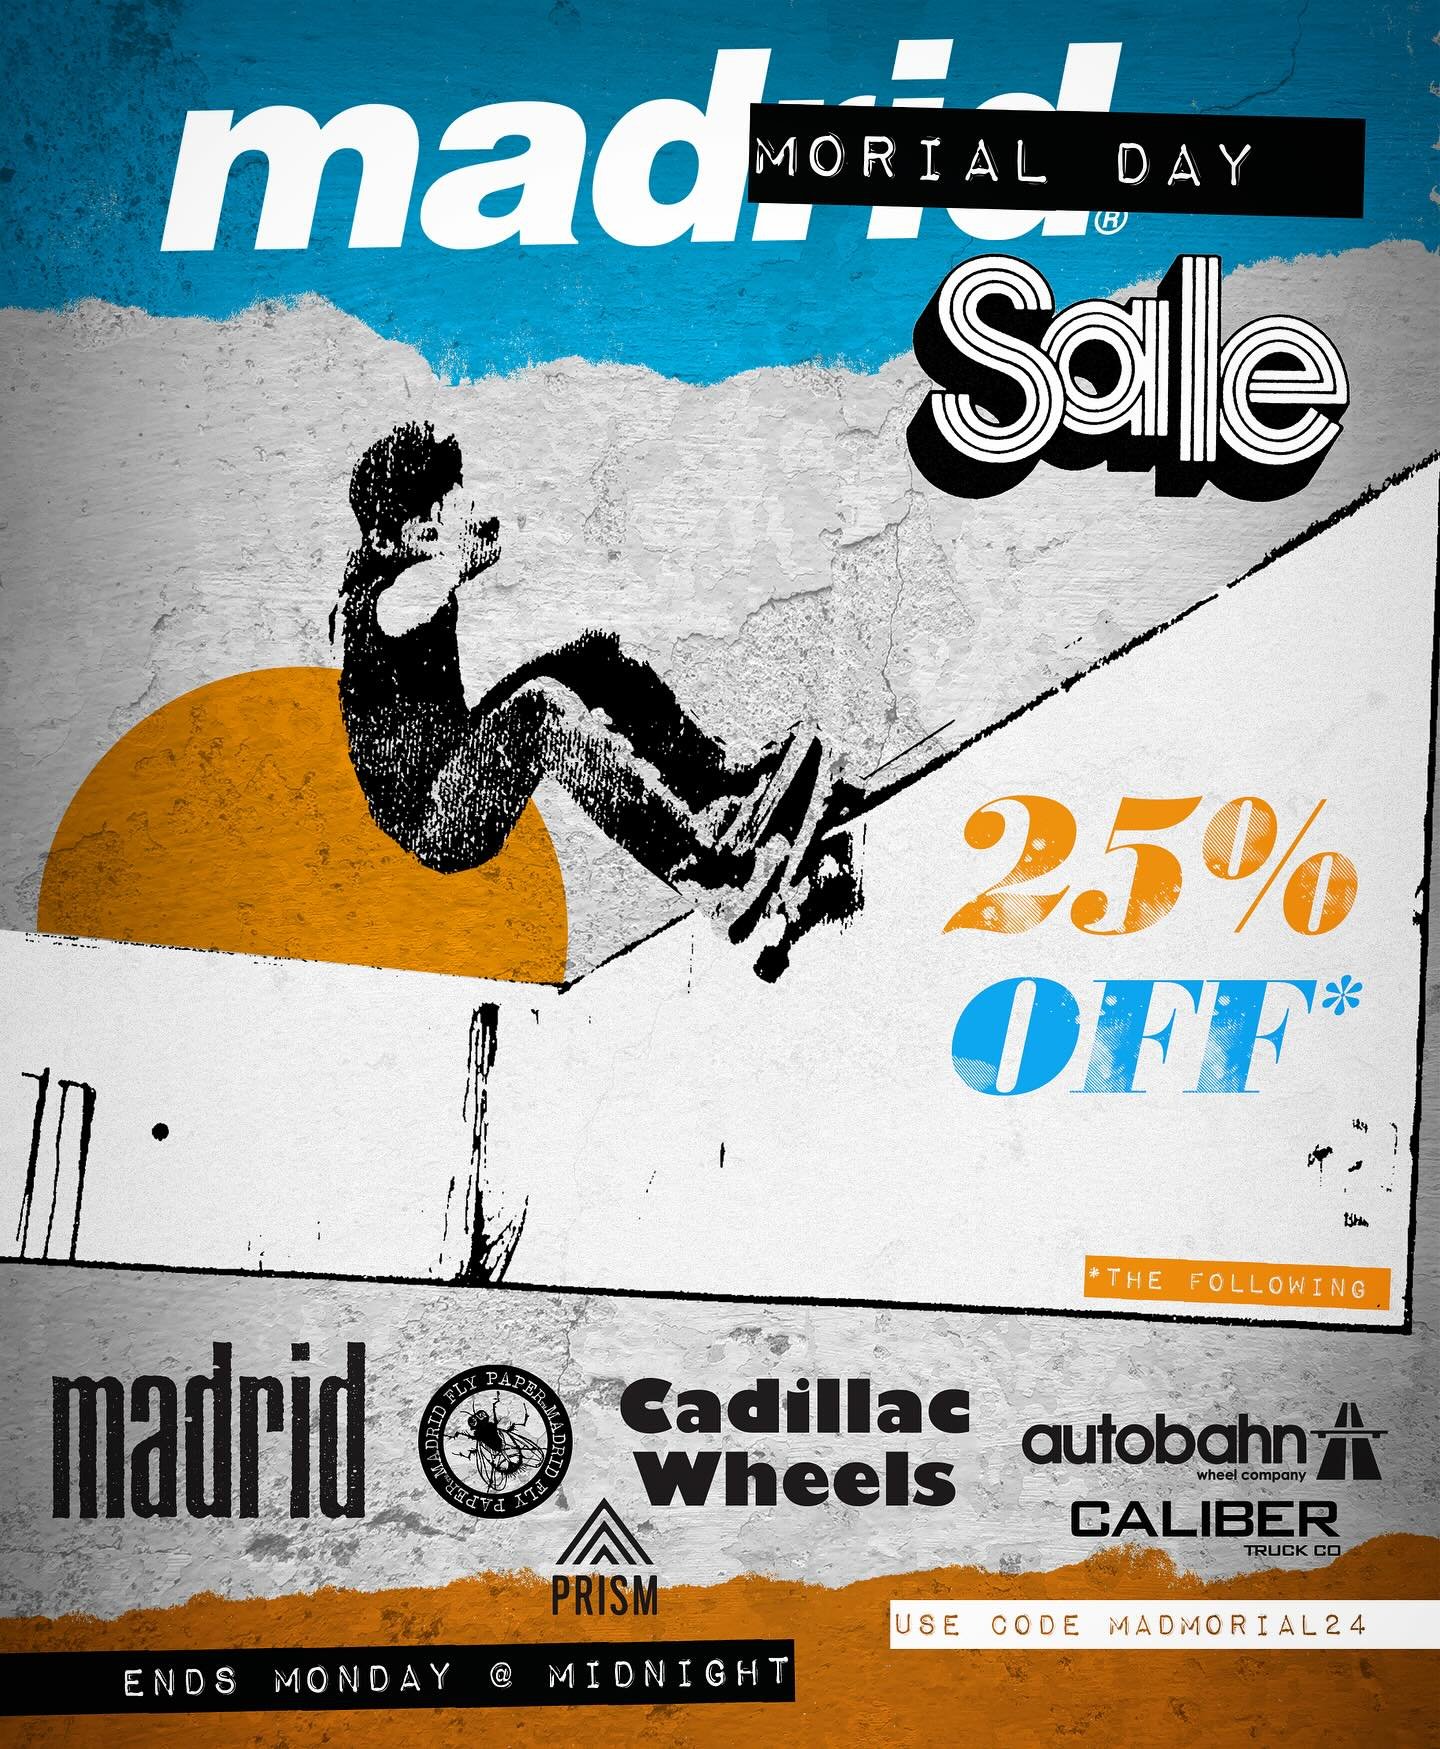 STOCK UP this weekend with 25% OFF 💵

Use code MADMORIAL24 for discounts on @madridskateboards @flypapergrip @autobahnwheelco @cadillacwheels and more🤙

*Cannot be combined with other promos | Does not apply to Sale items | Some exclusions do apply